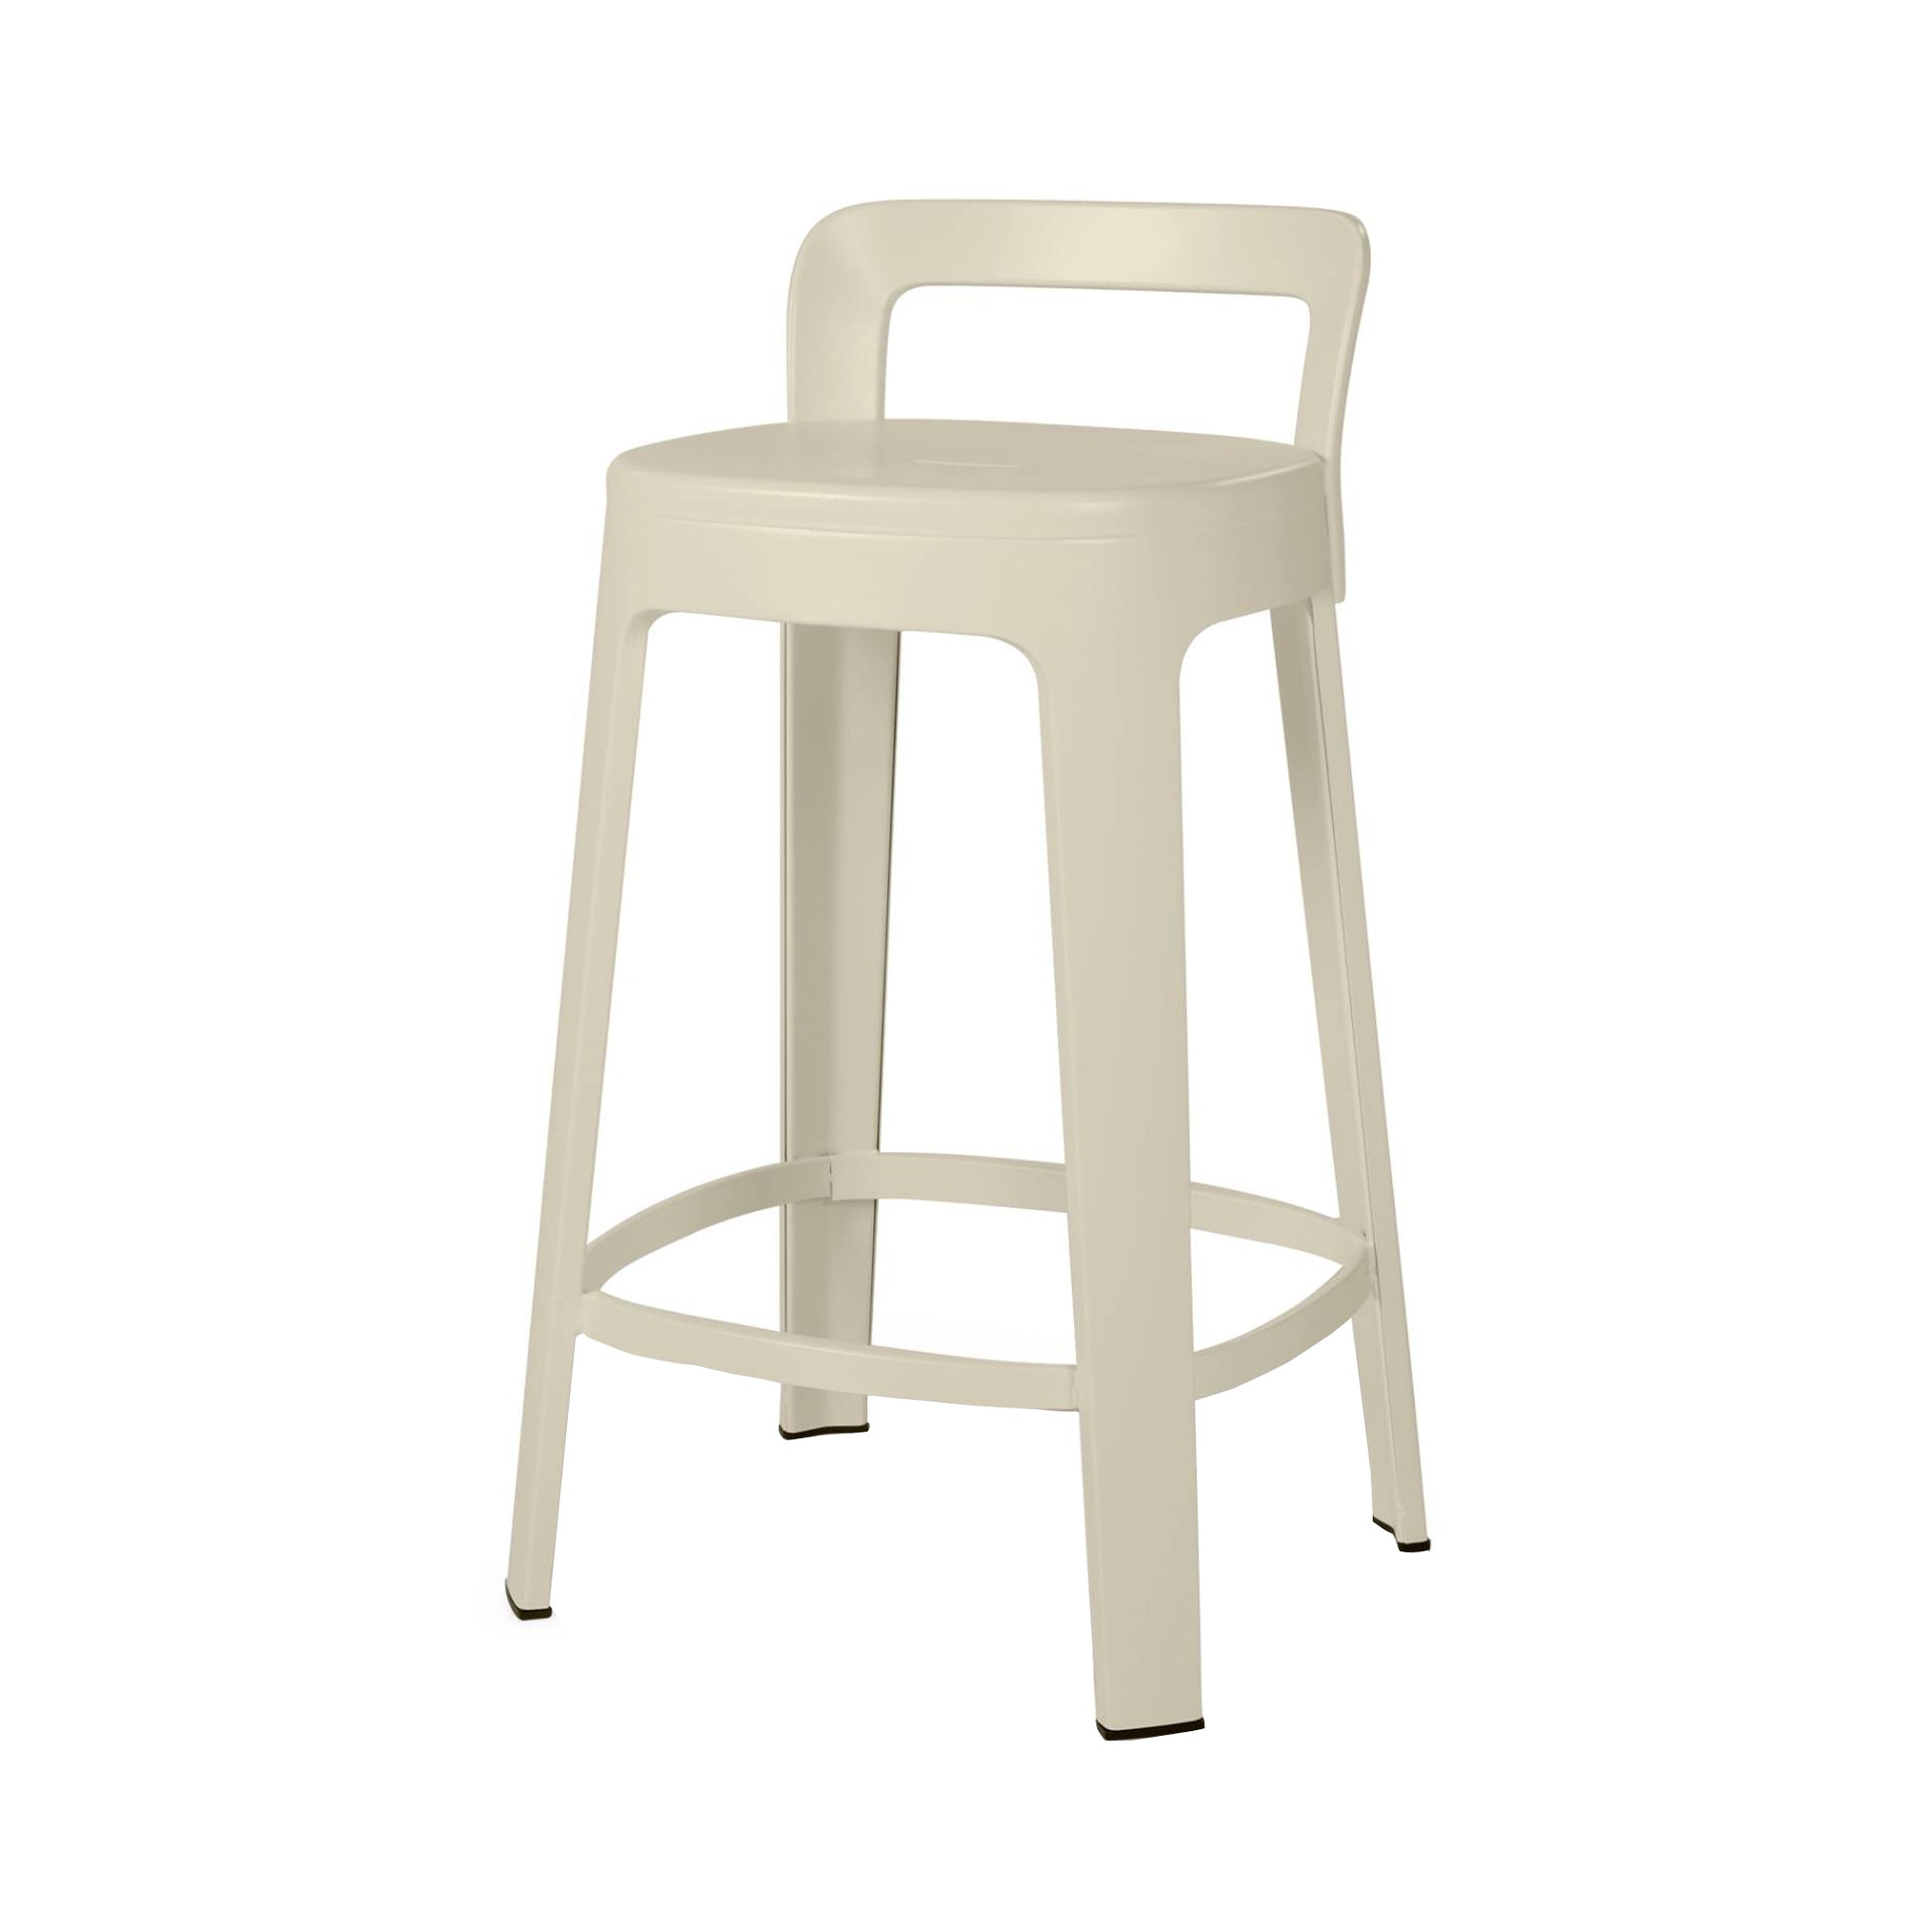 Ombra Bar + Counter Stool with Backrest: Bar + Grey